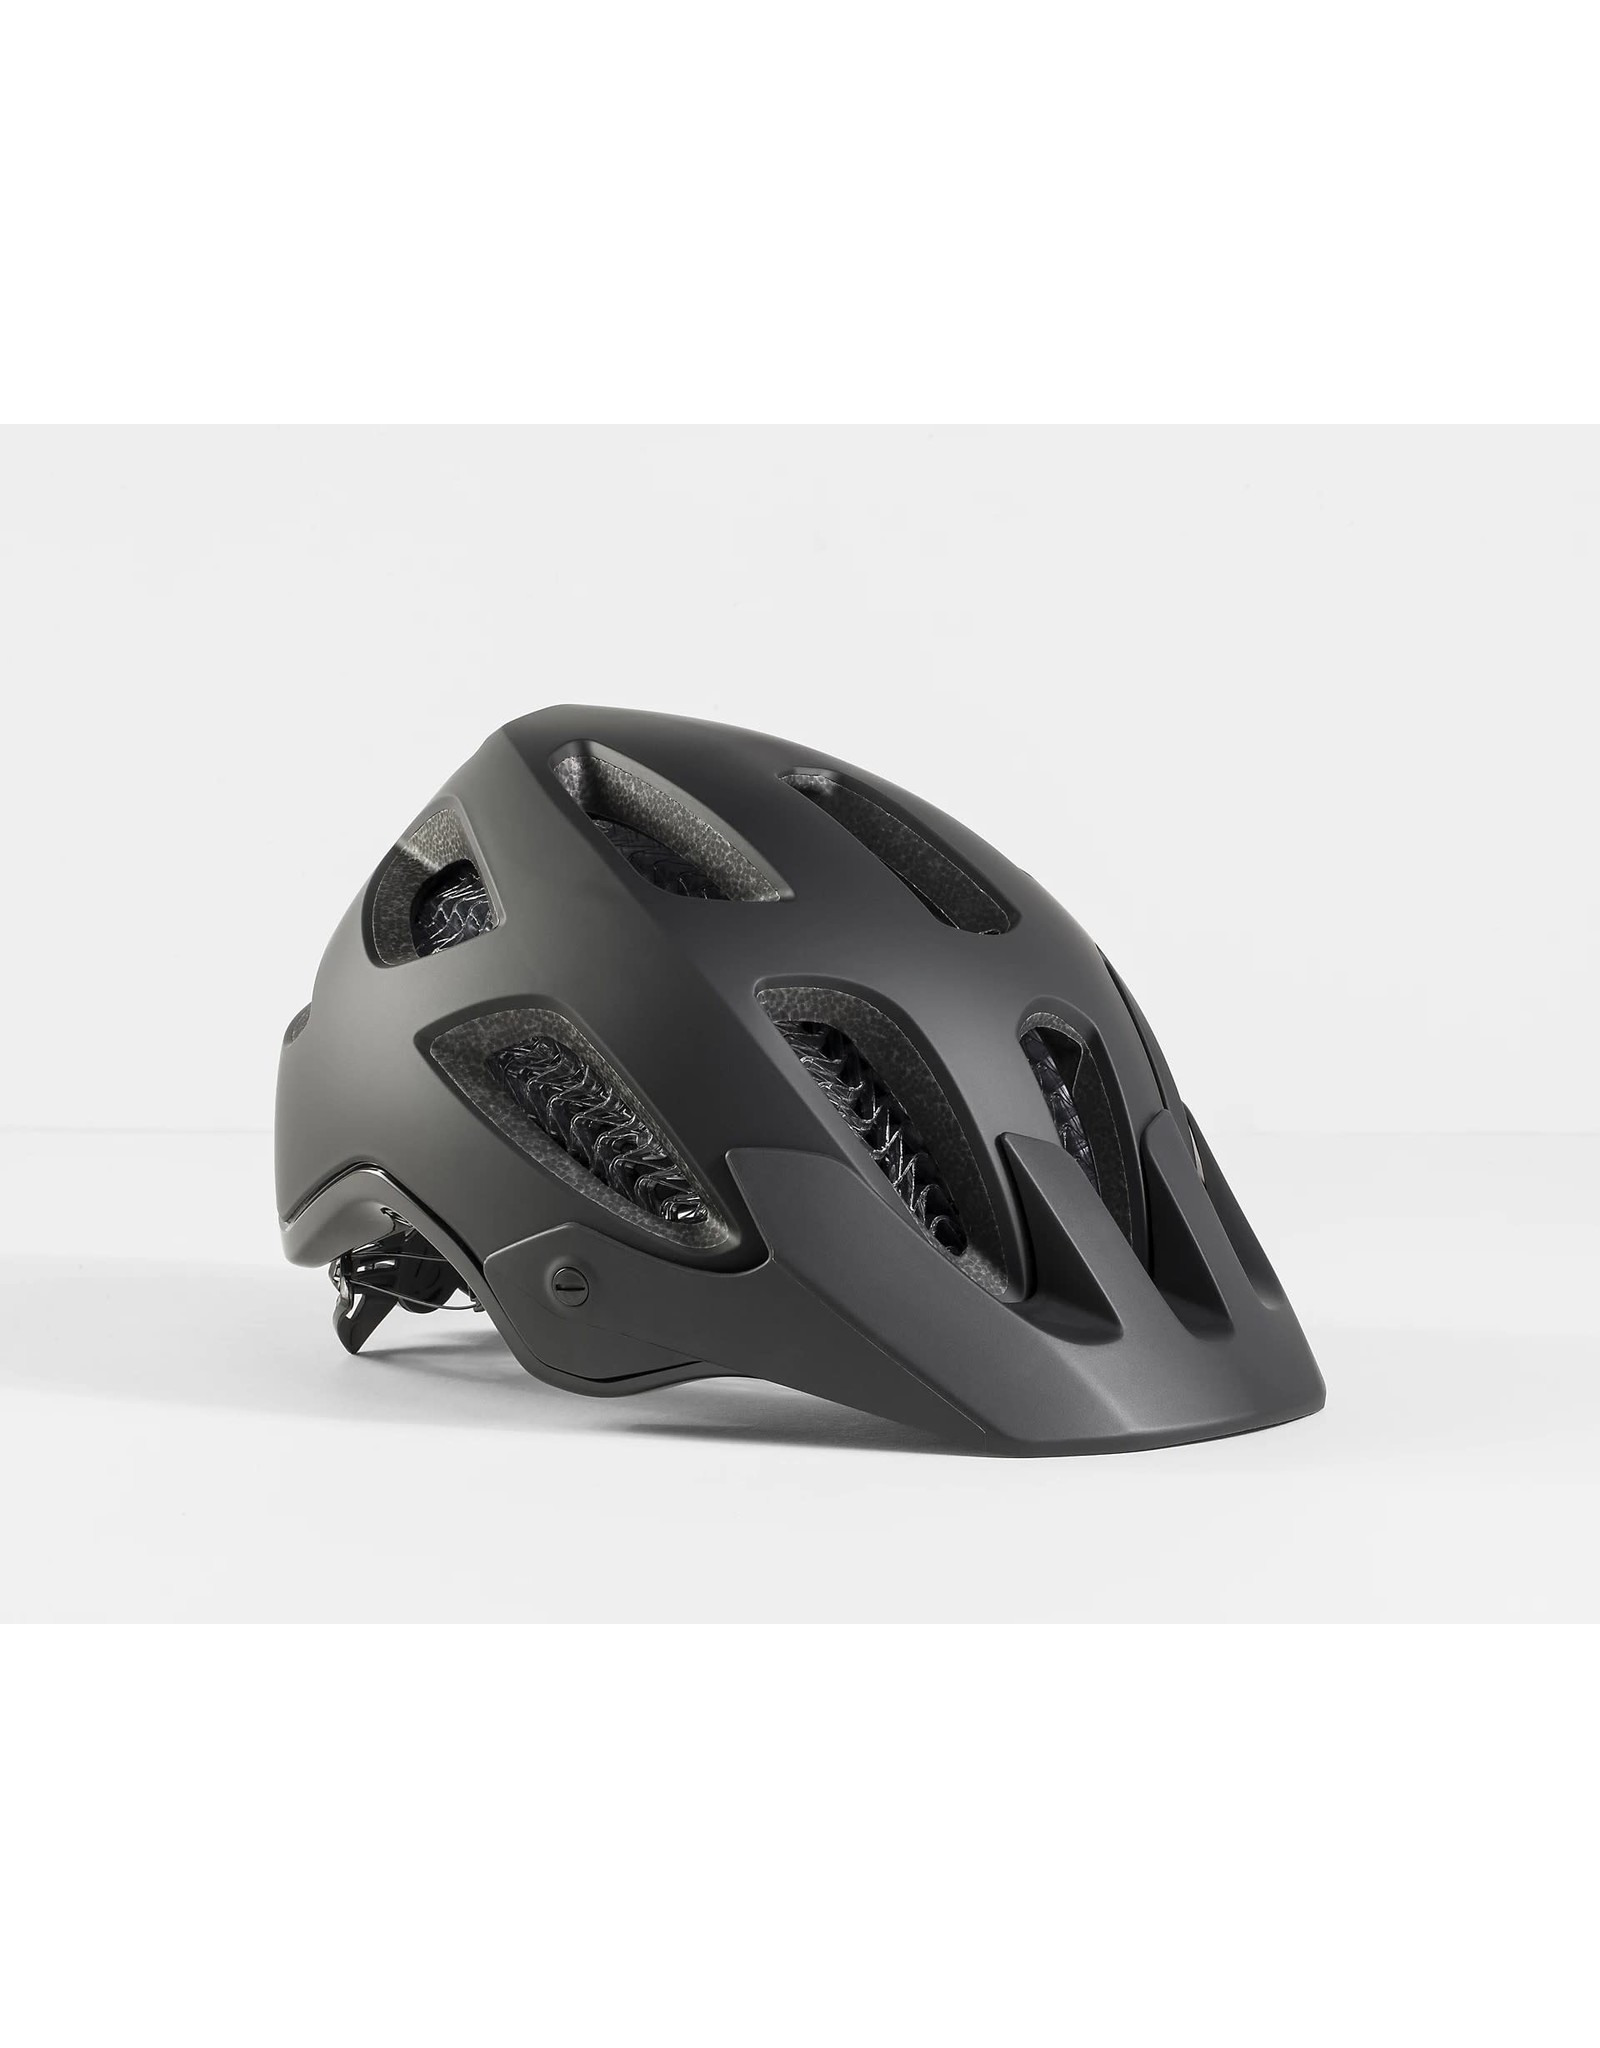 BONTRAGER RALLY WAVECELL